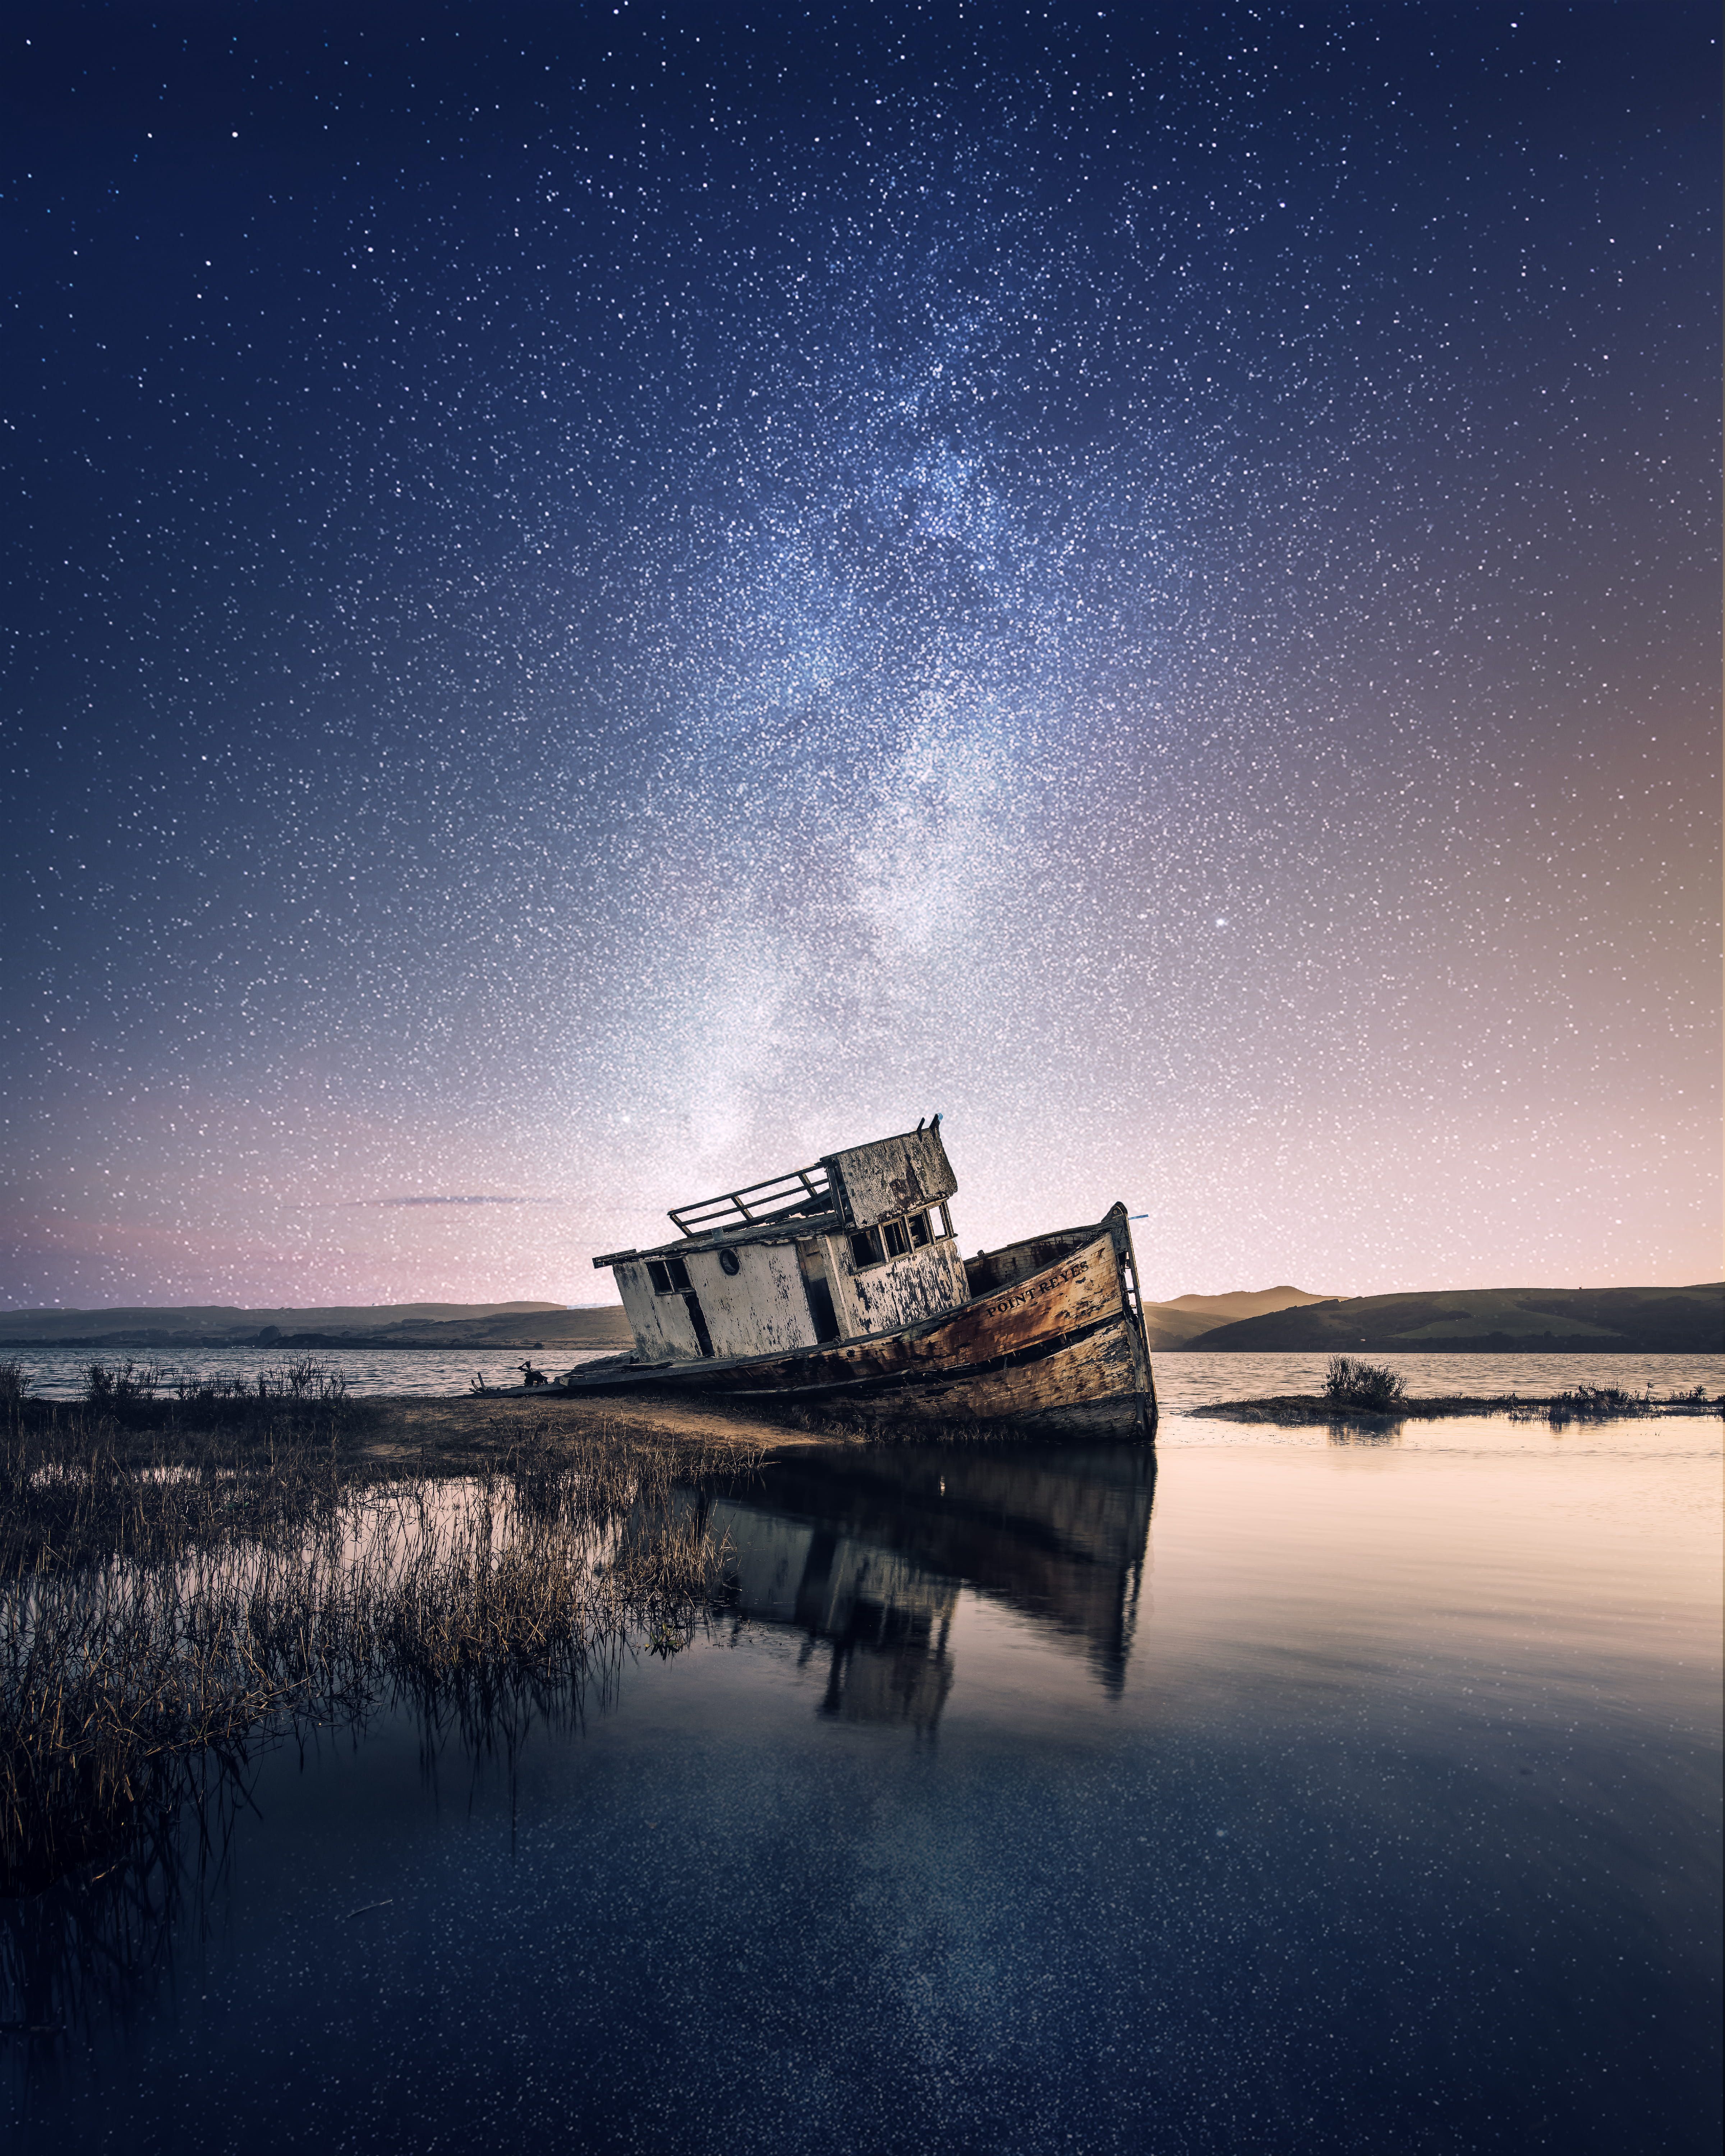 Wrecked Ship on Body of Water With Galaxy Background #abandoned #beach #boat #clouds #evening #grass #landscape #oc. Galaxy background, Boat wallpaper, Background